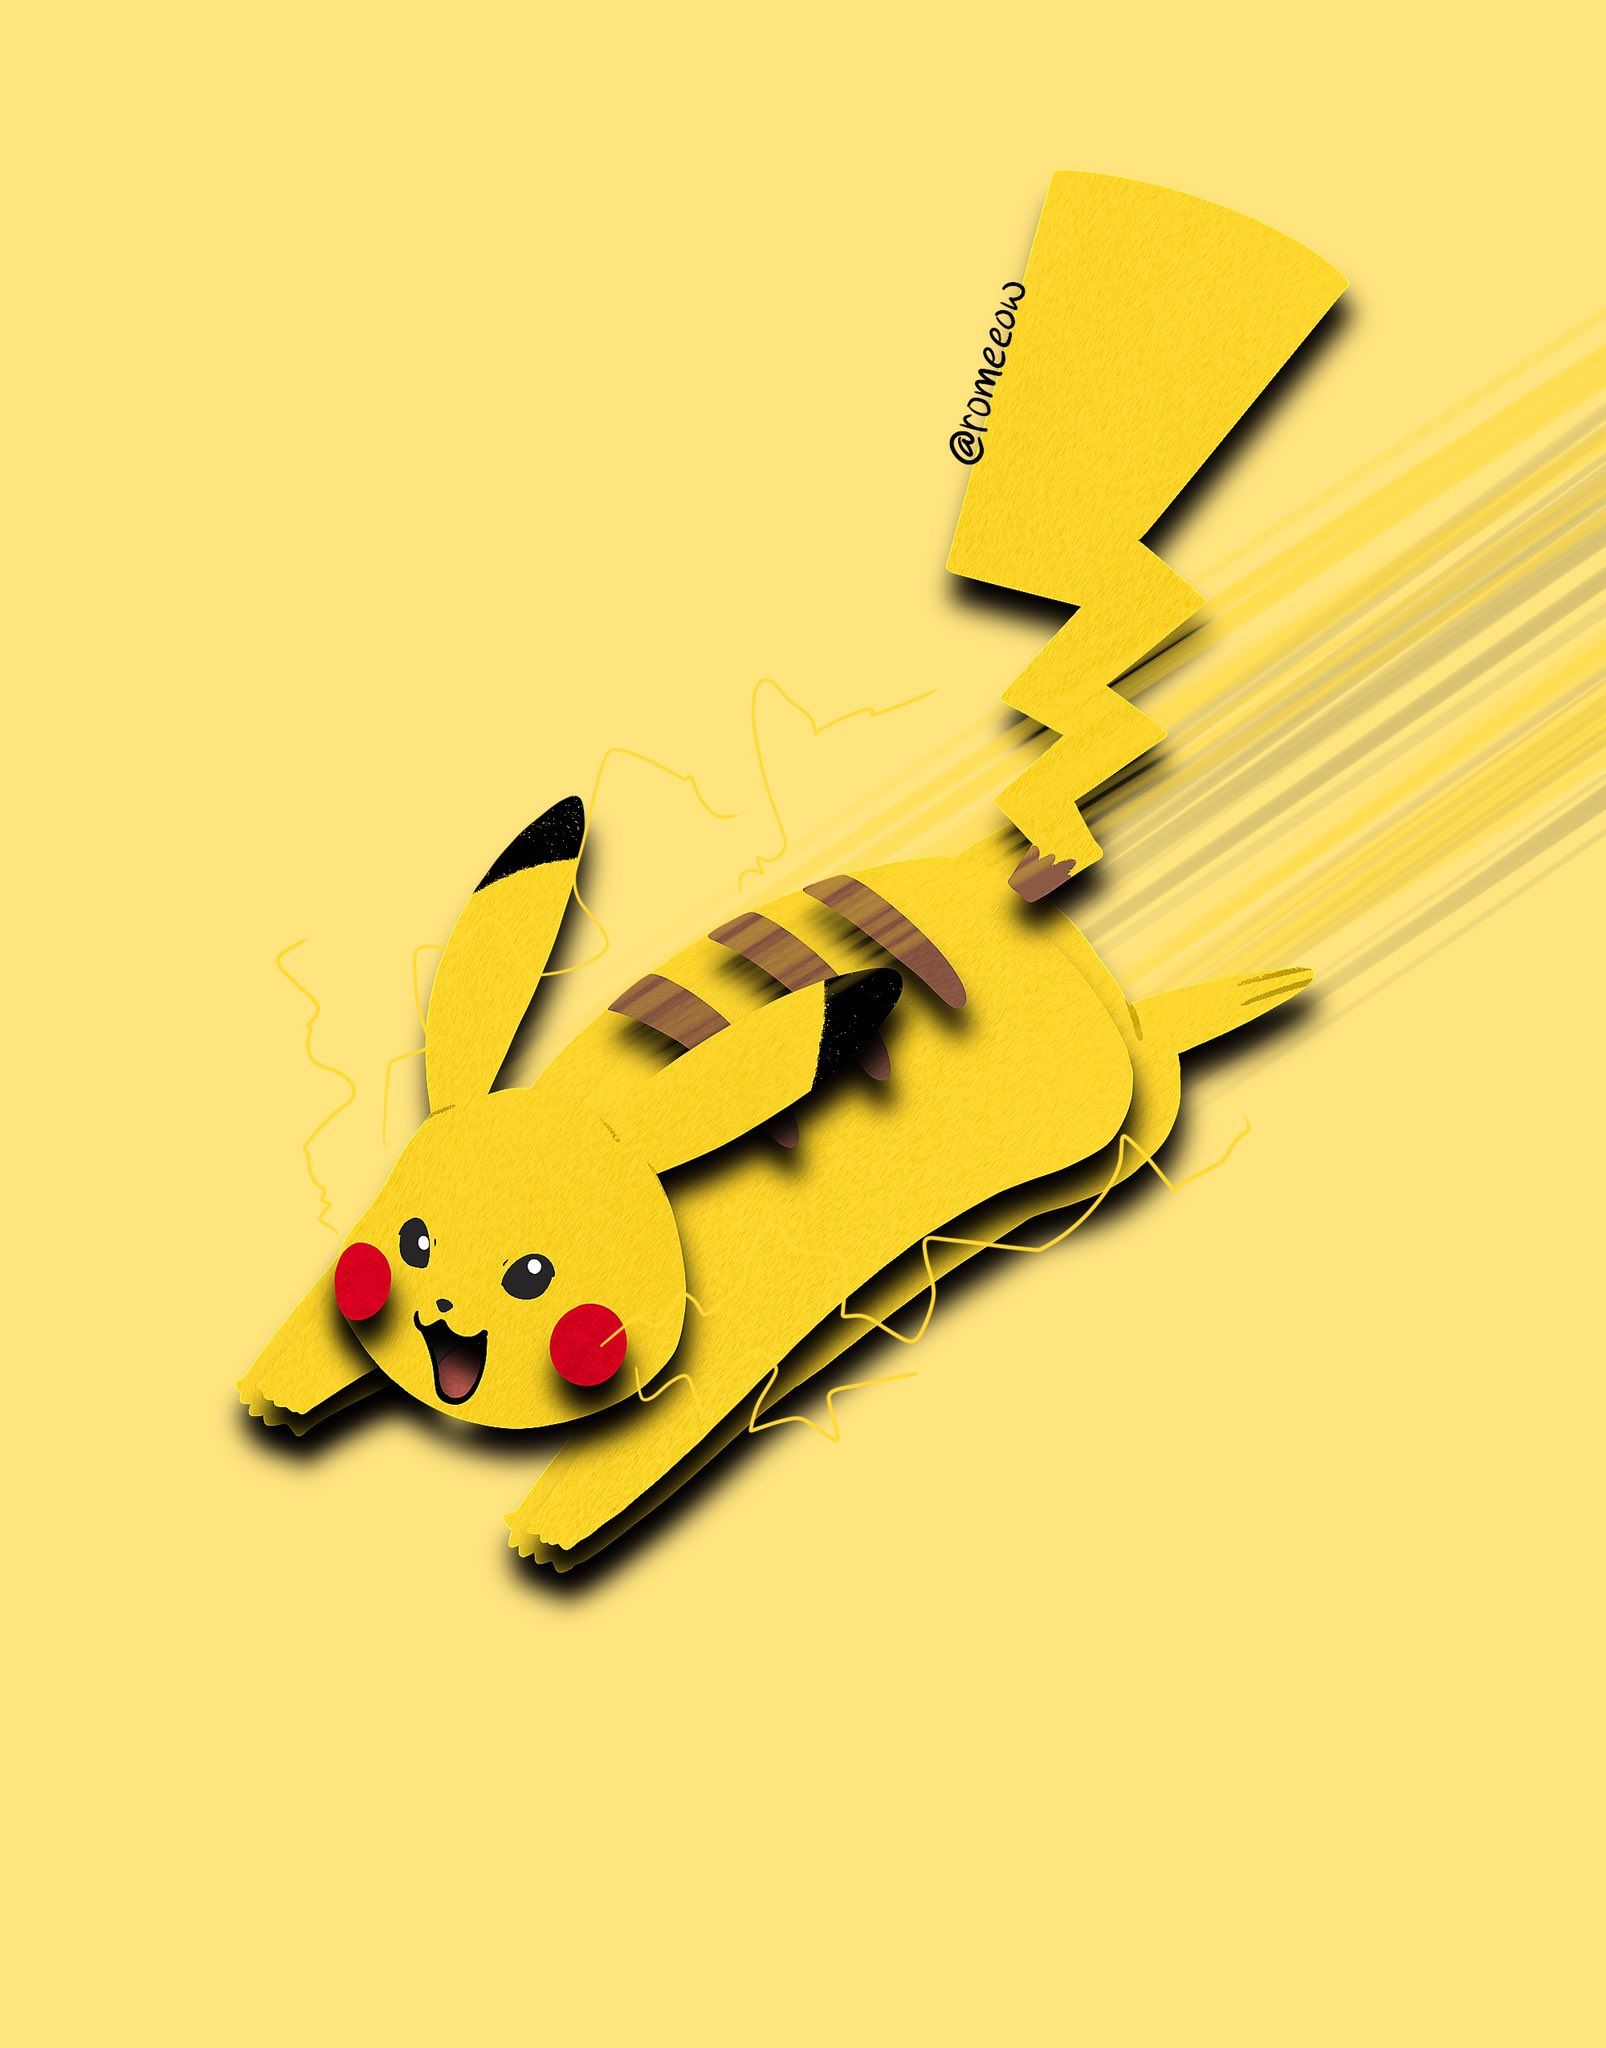 Krisna Tan quick drawing before bed time. Chubby Pikachu using Volt Tackle. Feel free to use it as a phone wallpaper